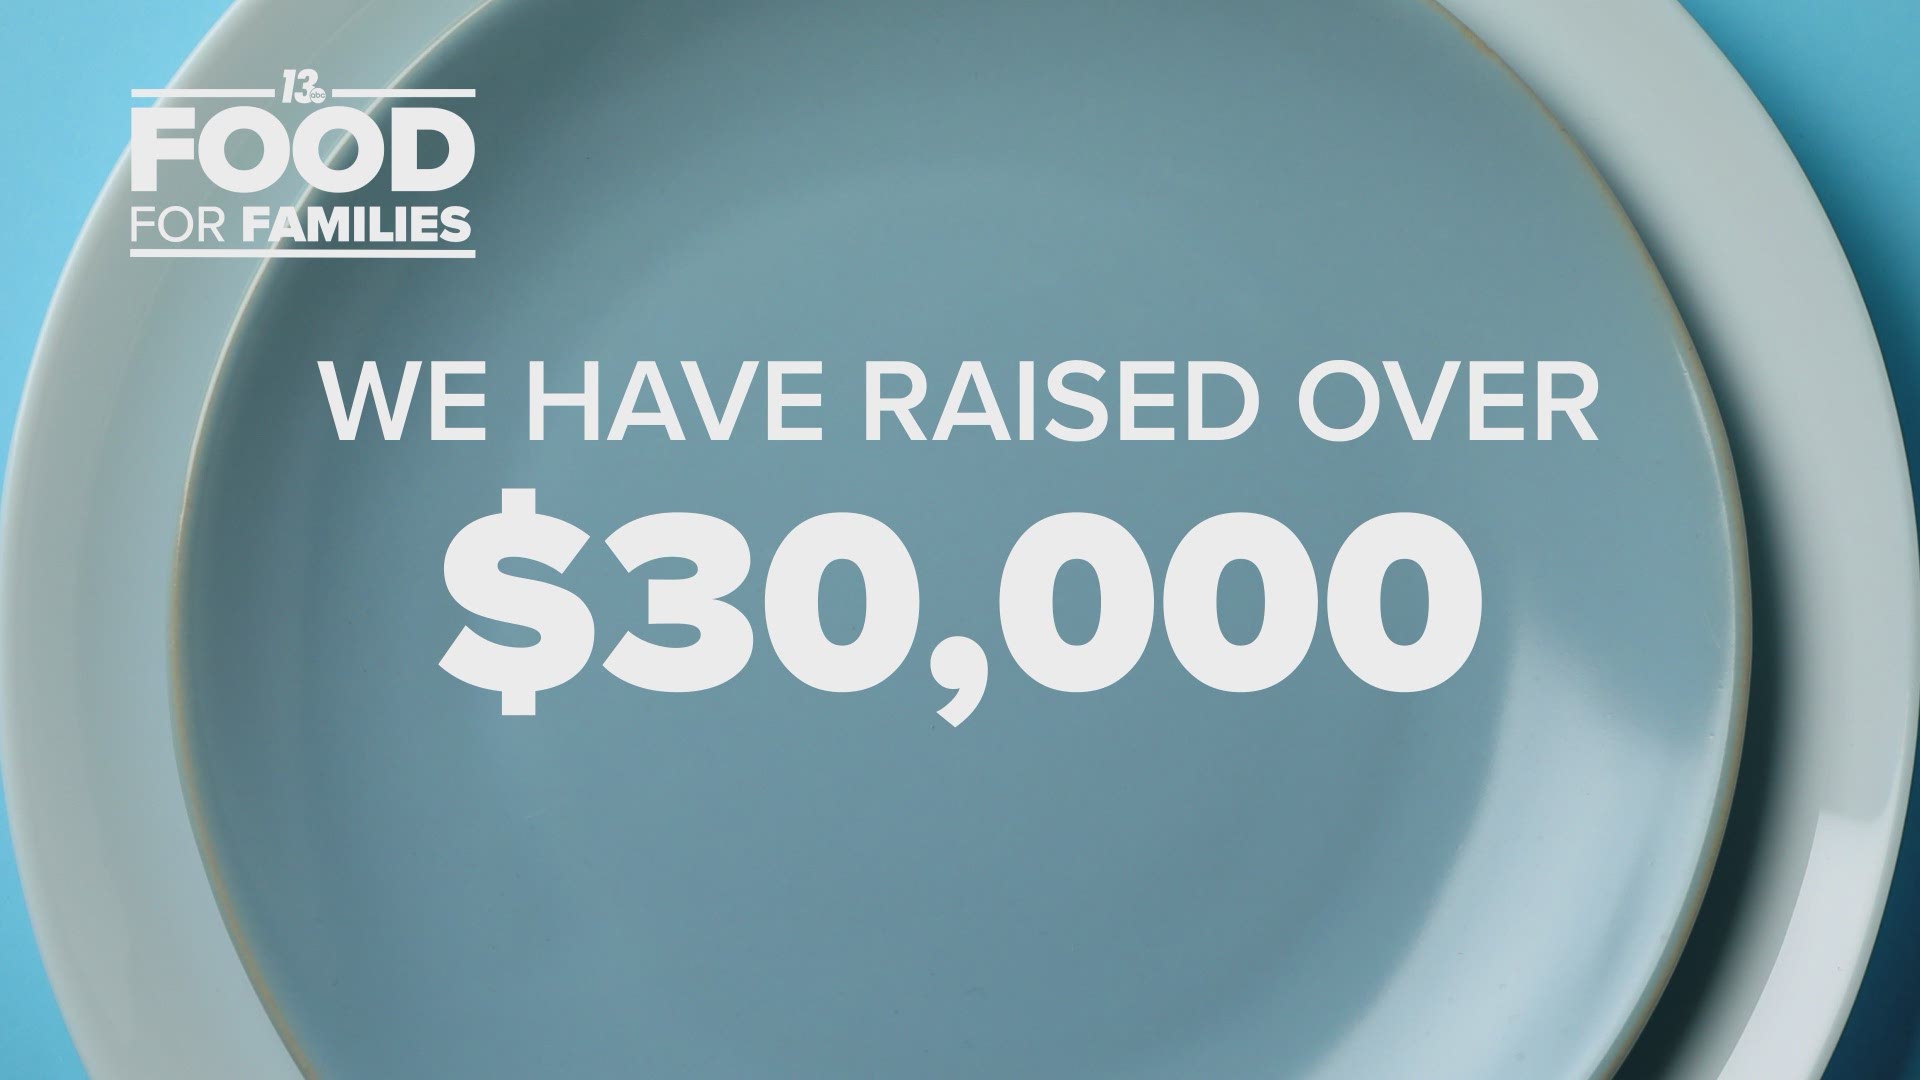 13 FOOD FOR FAMILIES raised over $30,000 for three West Michigan charities to help people needing access to nutritious food.